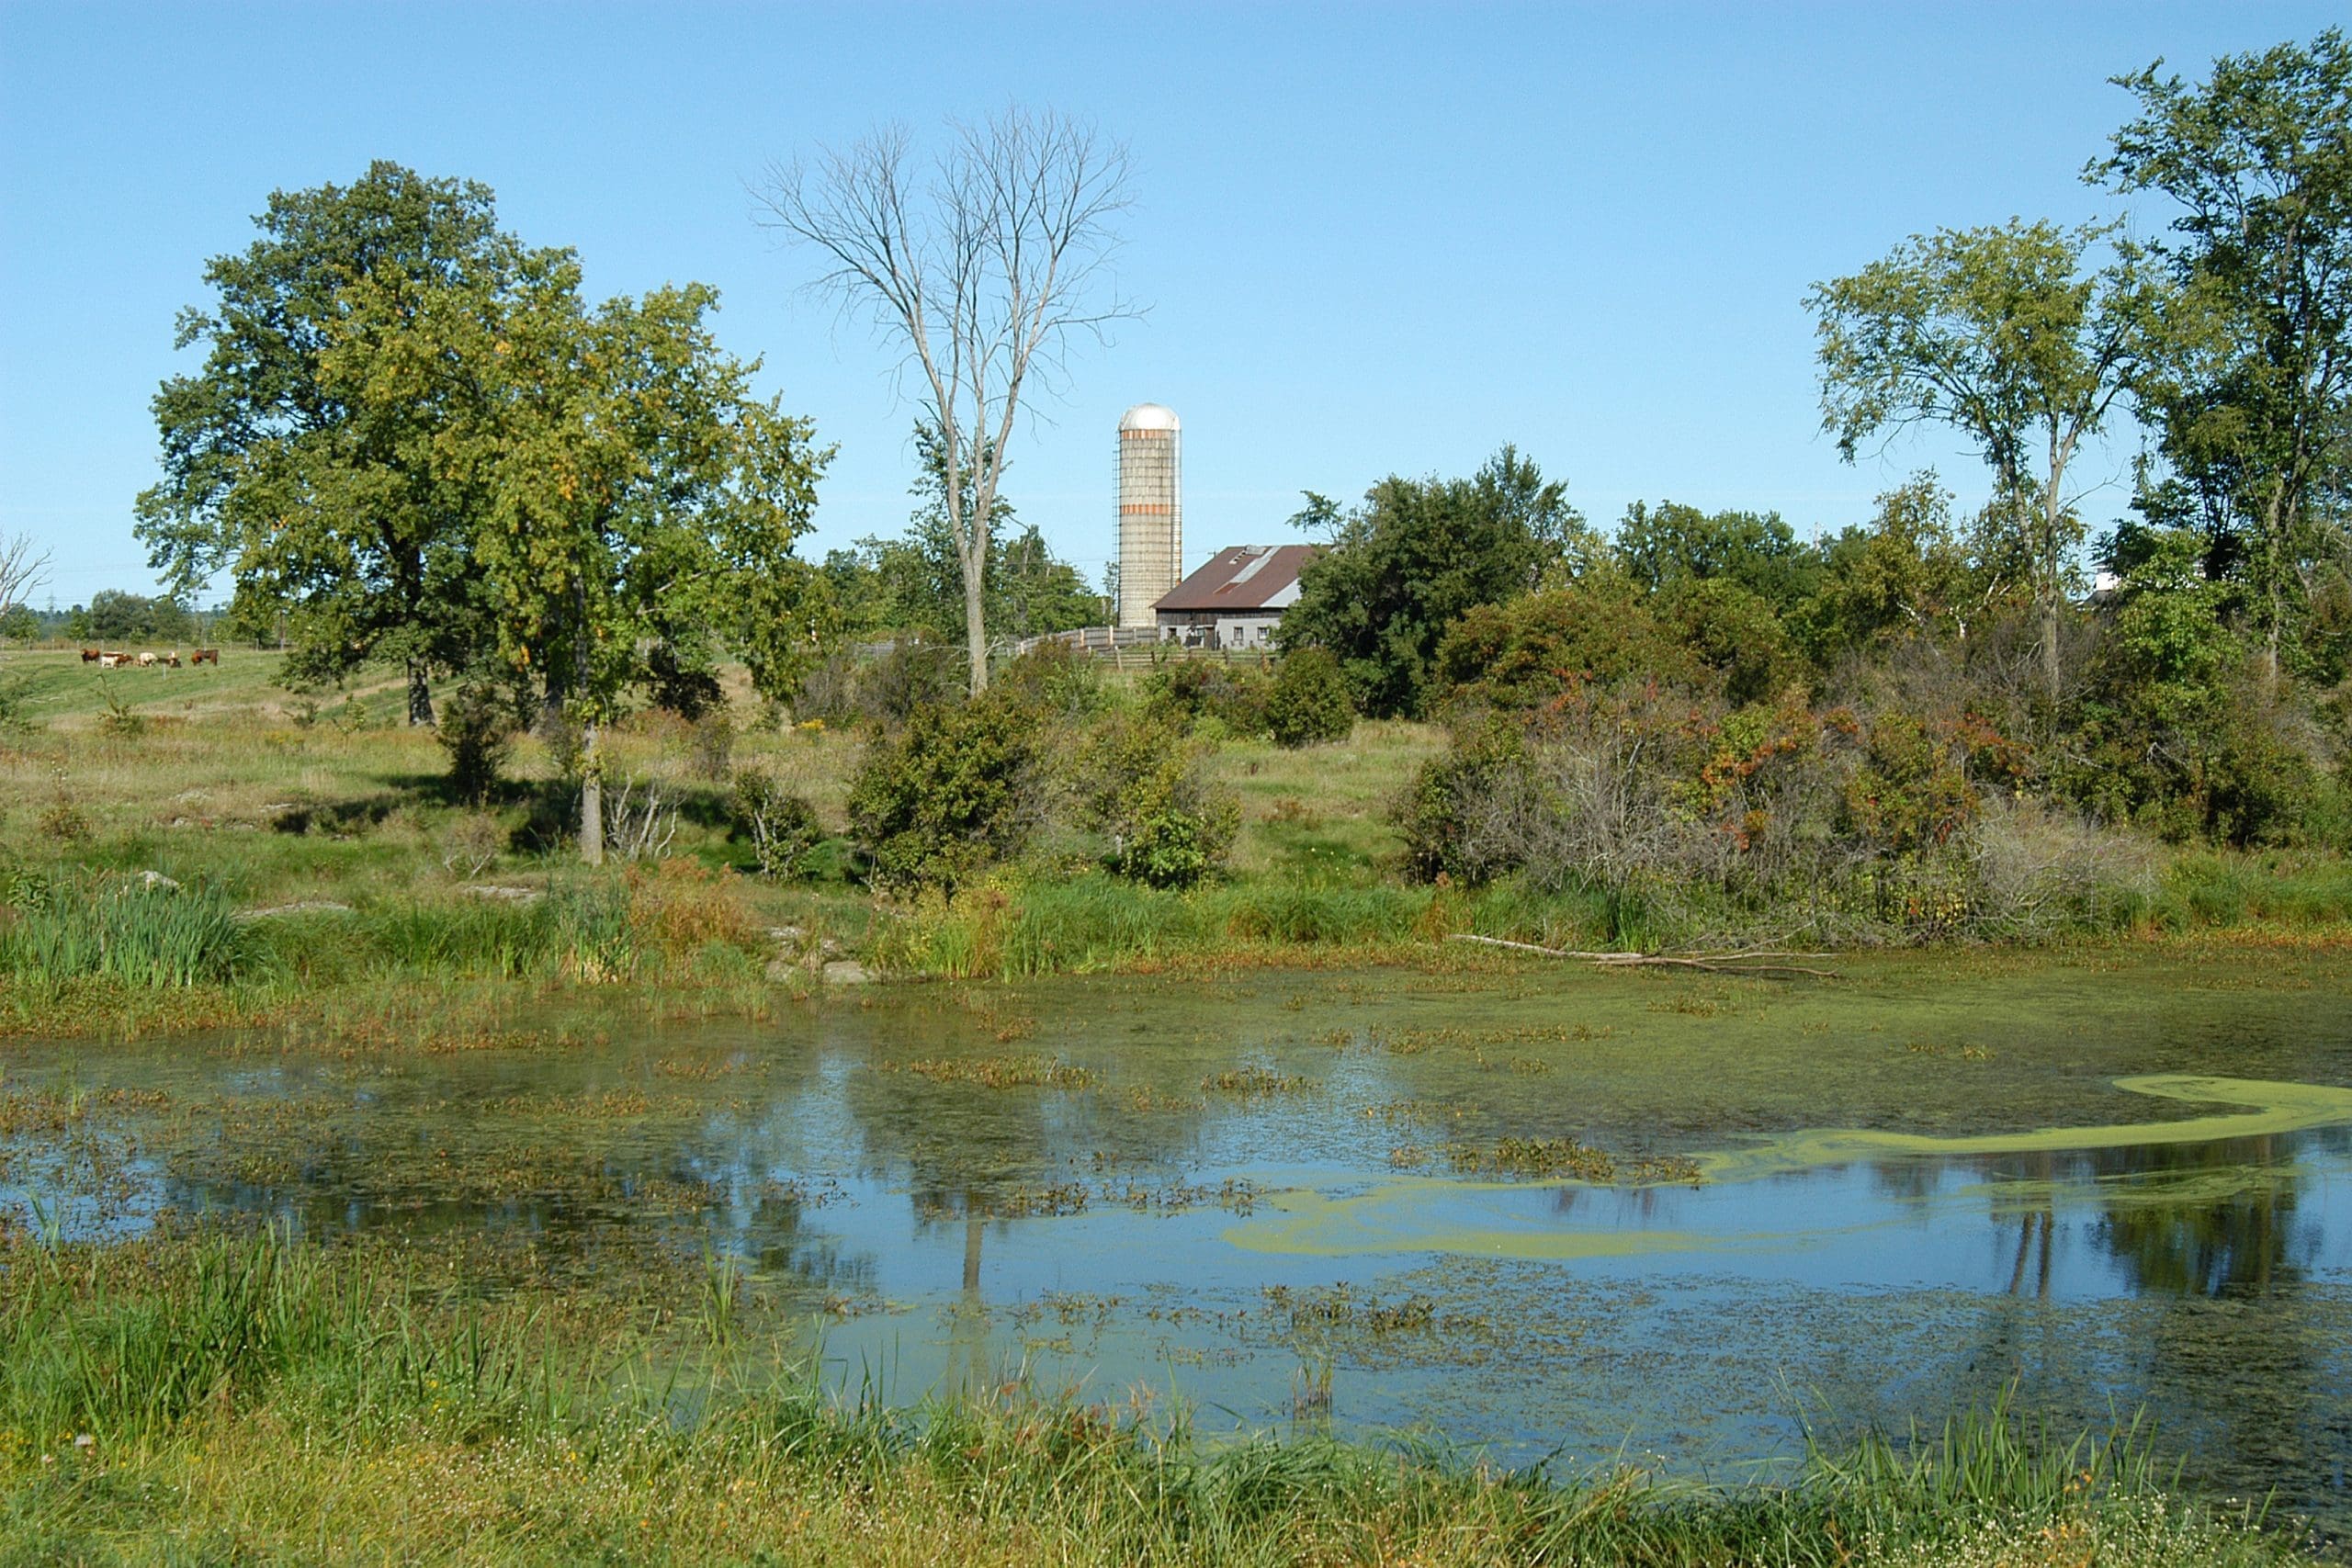 Small wetland projects may involve excavations to create basins or small berms to hold back surface water as it travels across a property. Wetlands contribute to the natural infrastructure of landscapes by supporting phosphorus reduction, biodiversity, climate readiness, clean water and overall watershed health.